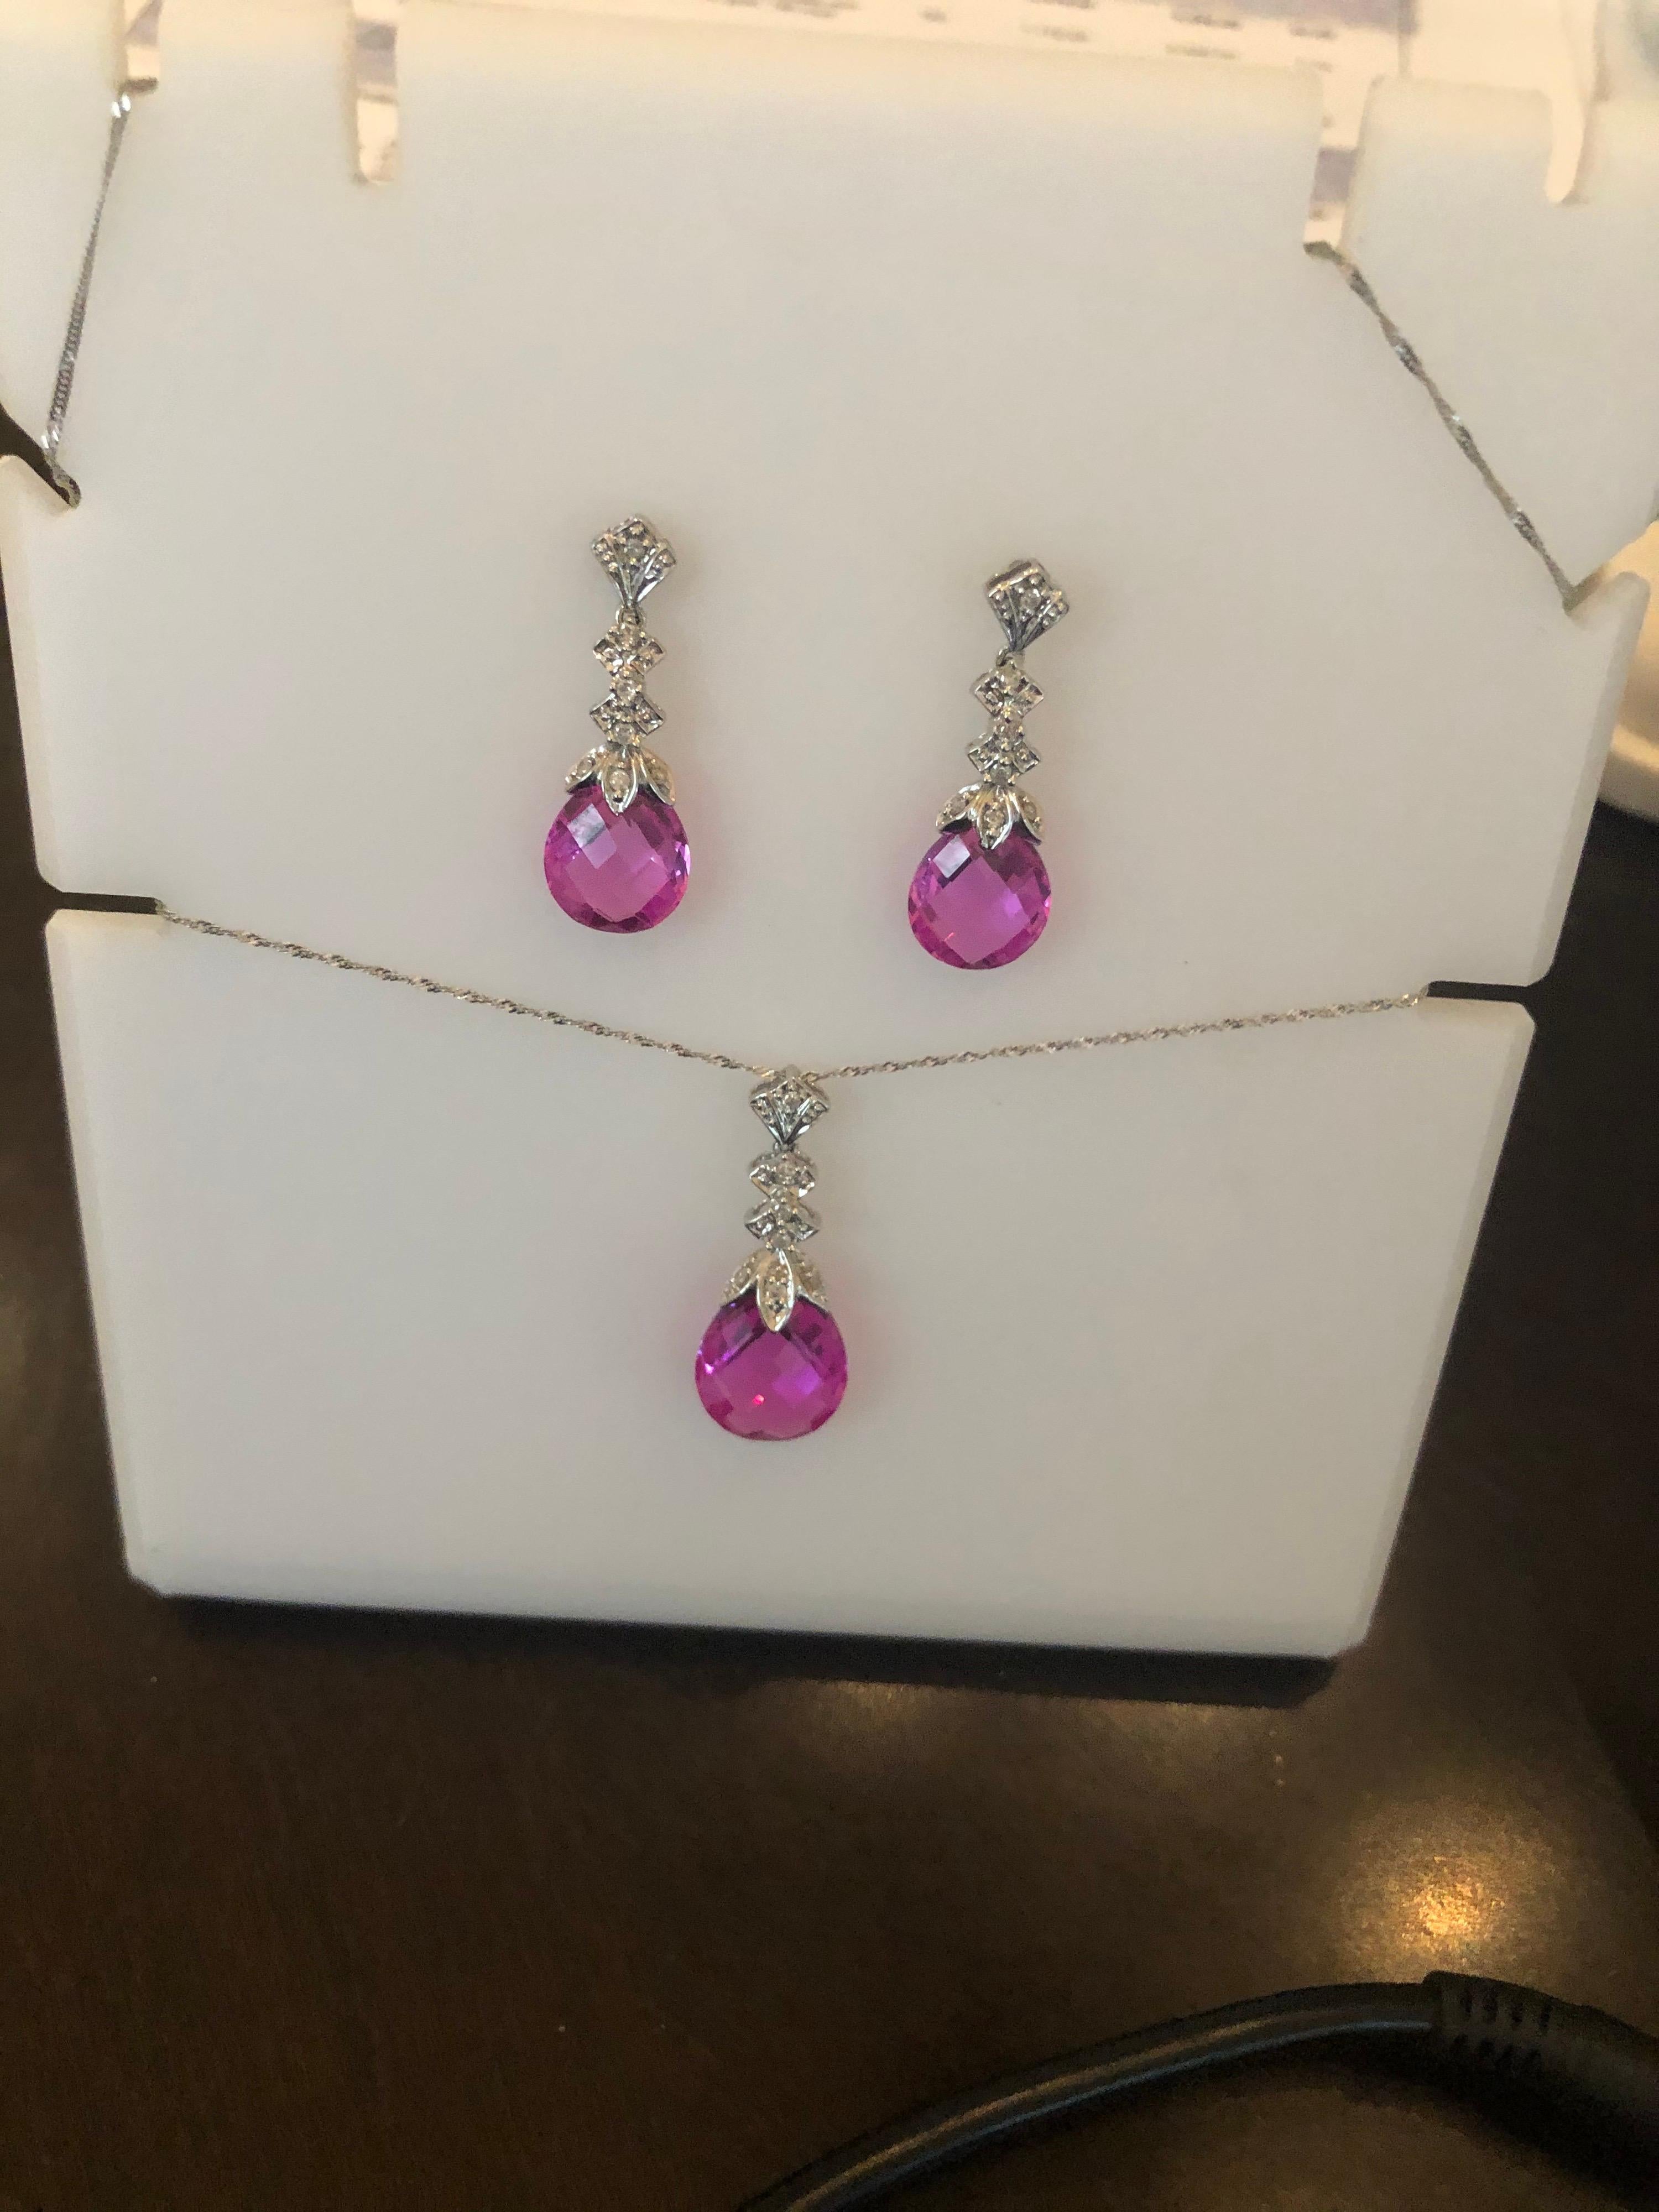 Sweet Pink!  10 karat white gold dangle earrings with Diamonds and Pink Stones paired with matching pendant on chain.   This fabulous set is gorgeous and fun.  A big look for a little bit! For pierced ears earrings hang 1 inch long and pendant is 1